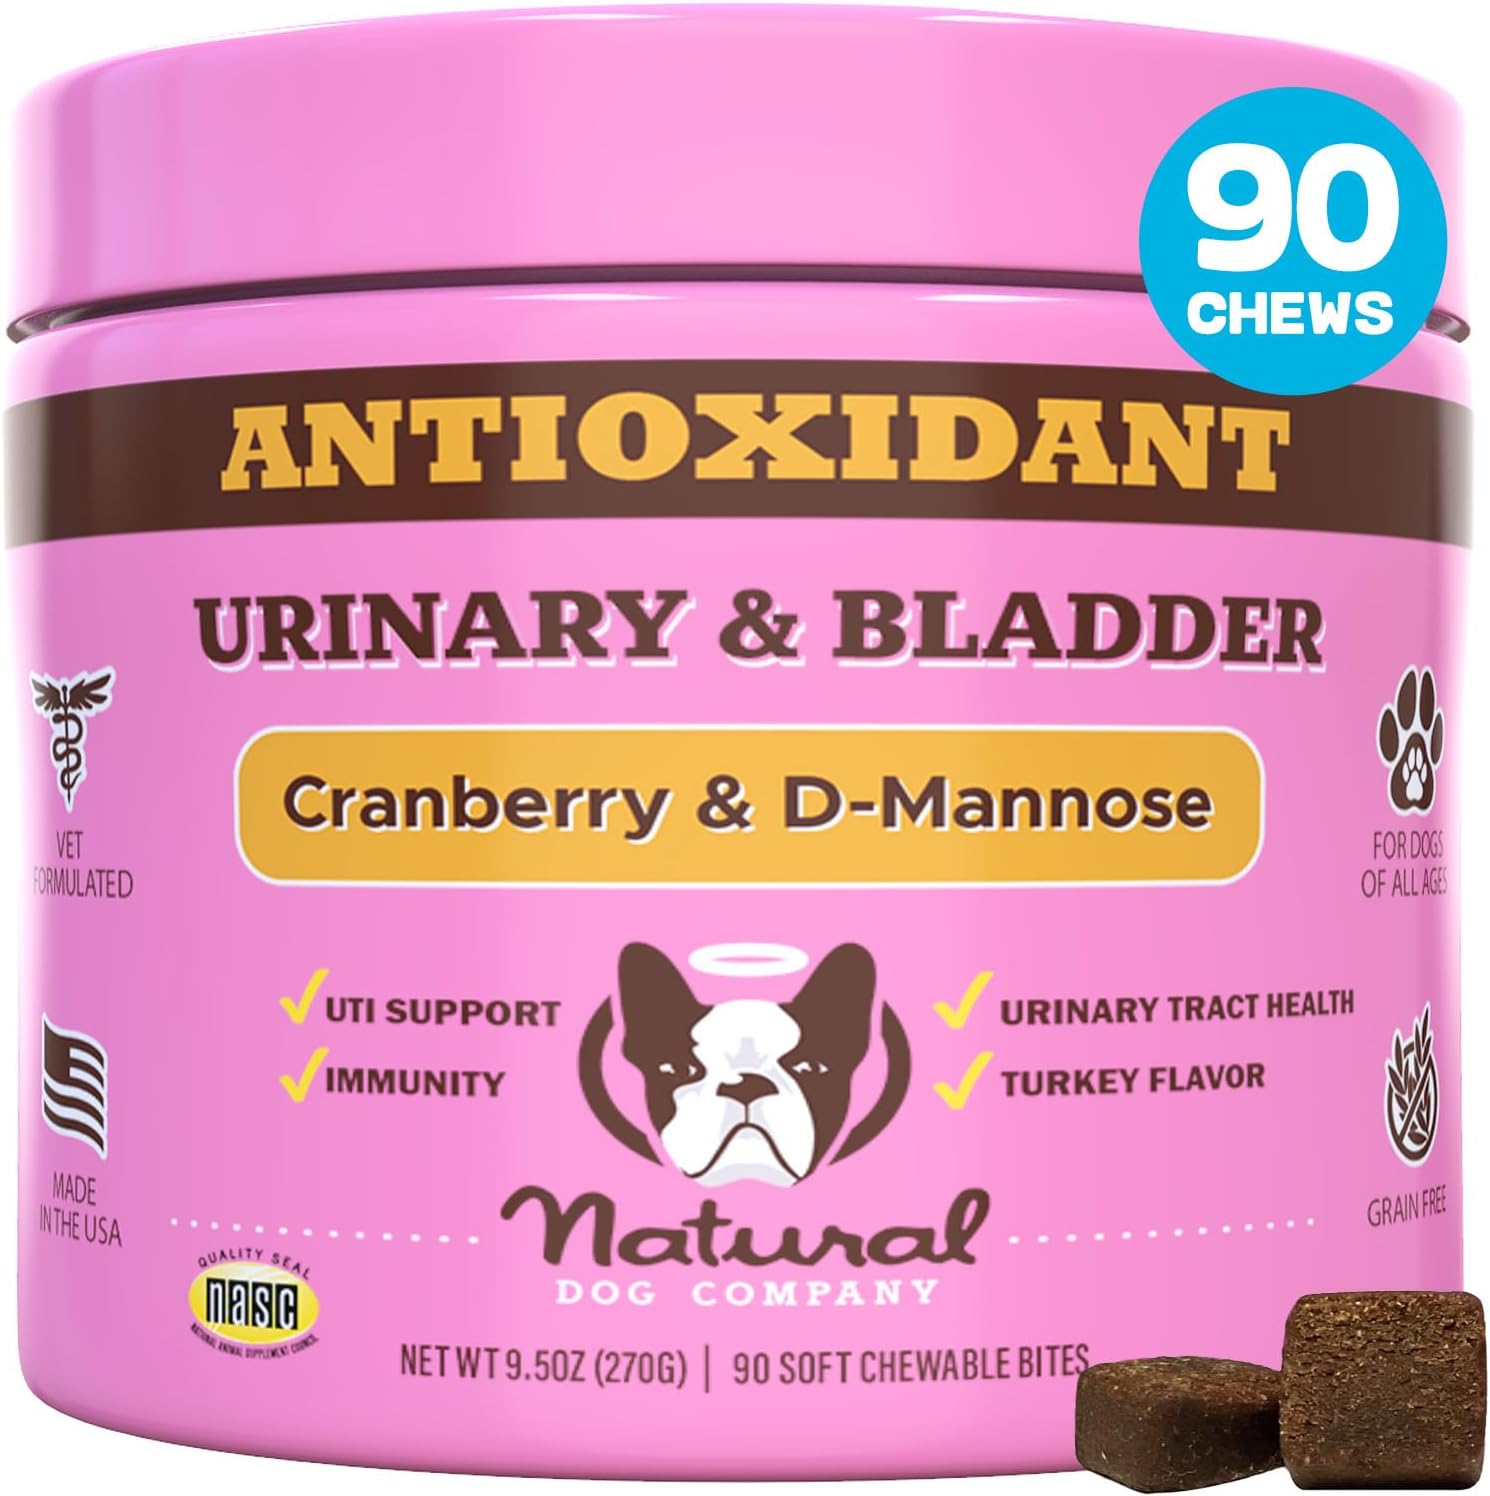 Natural Dog Company Cranberry Supplement for Dogs - Urinary & Bladder Support for Dogs - D-Mannose for Dogs Promotes Bladder Health - Turkey Flavor - Dog UTI Incontinence Supplement - 90 Soft Chews